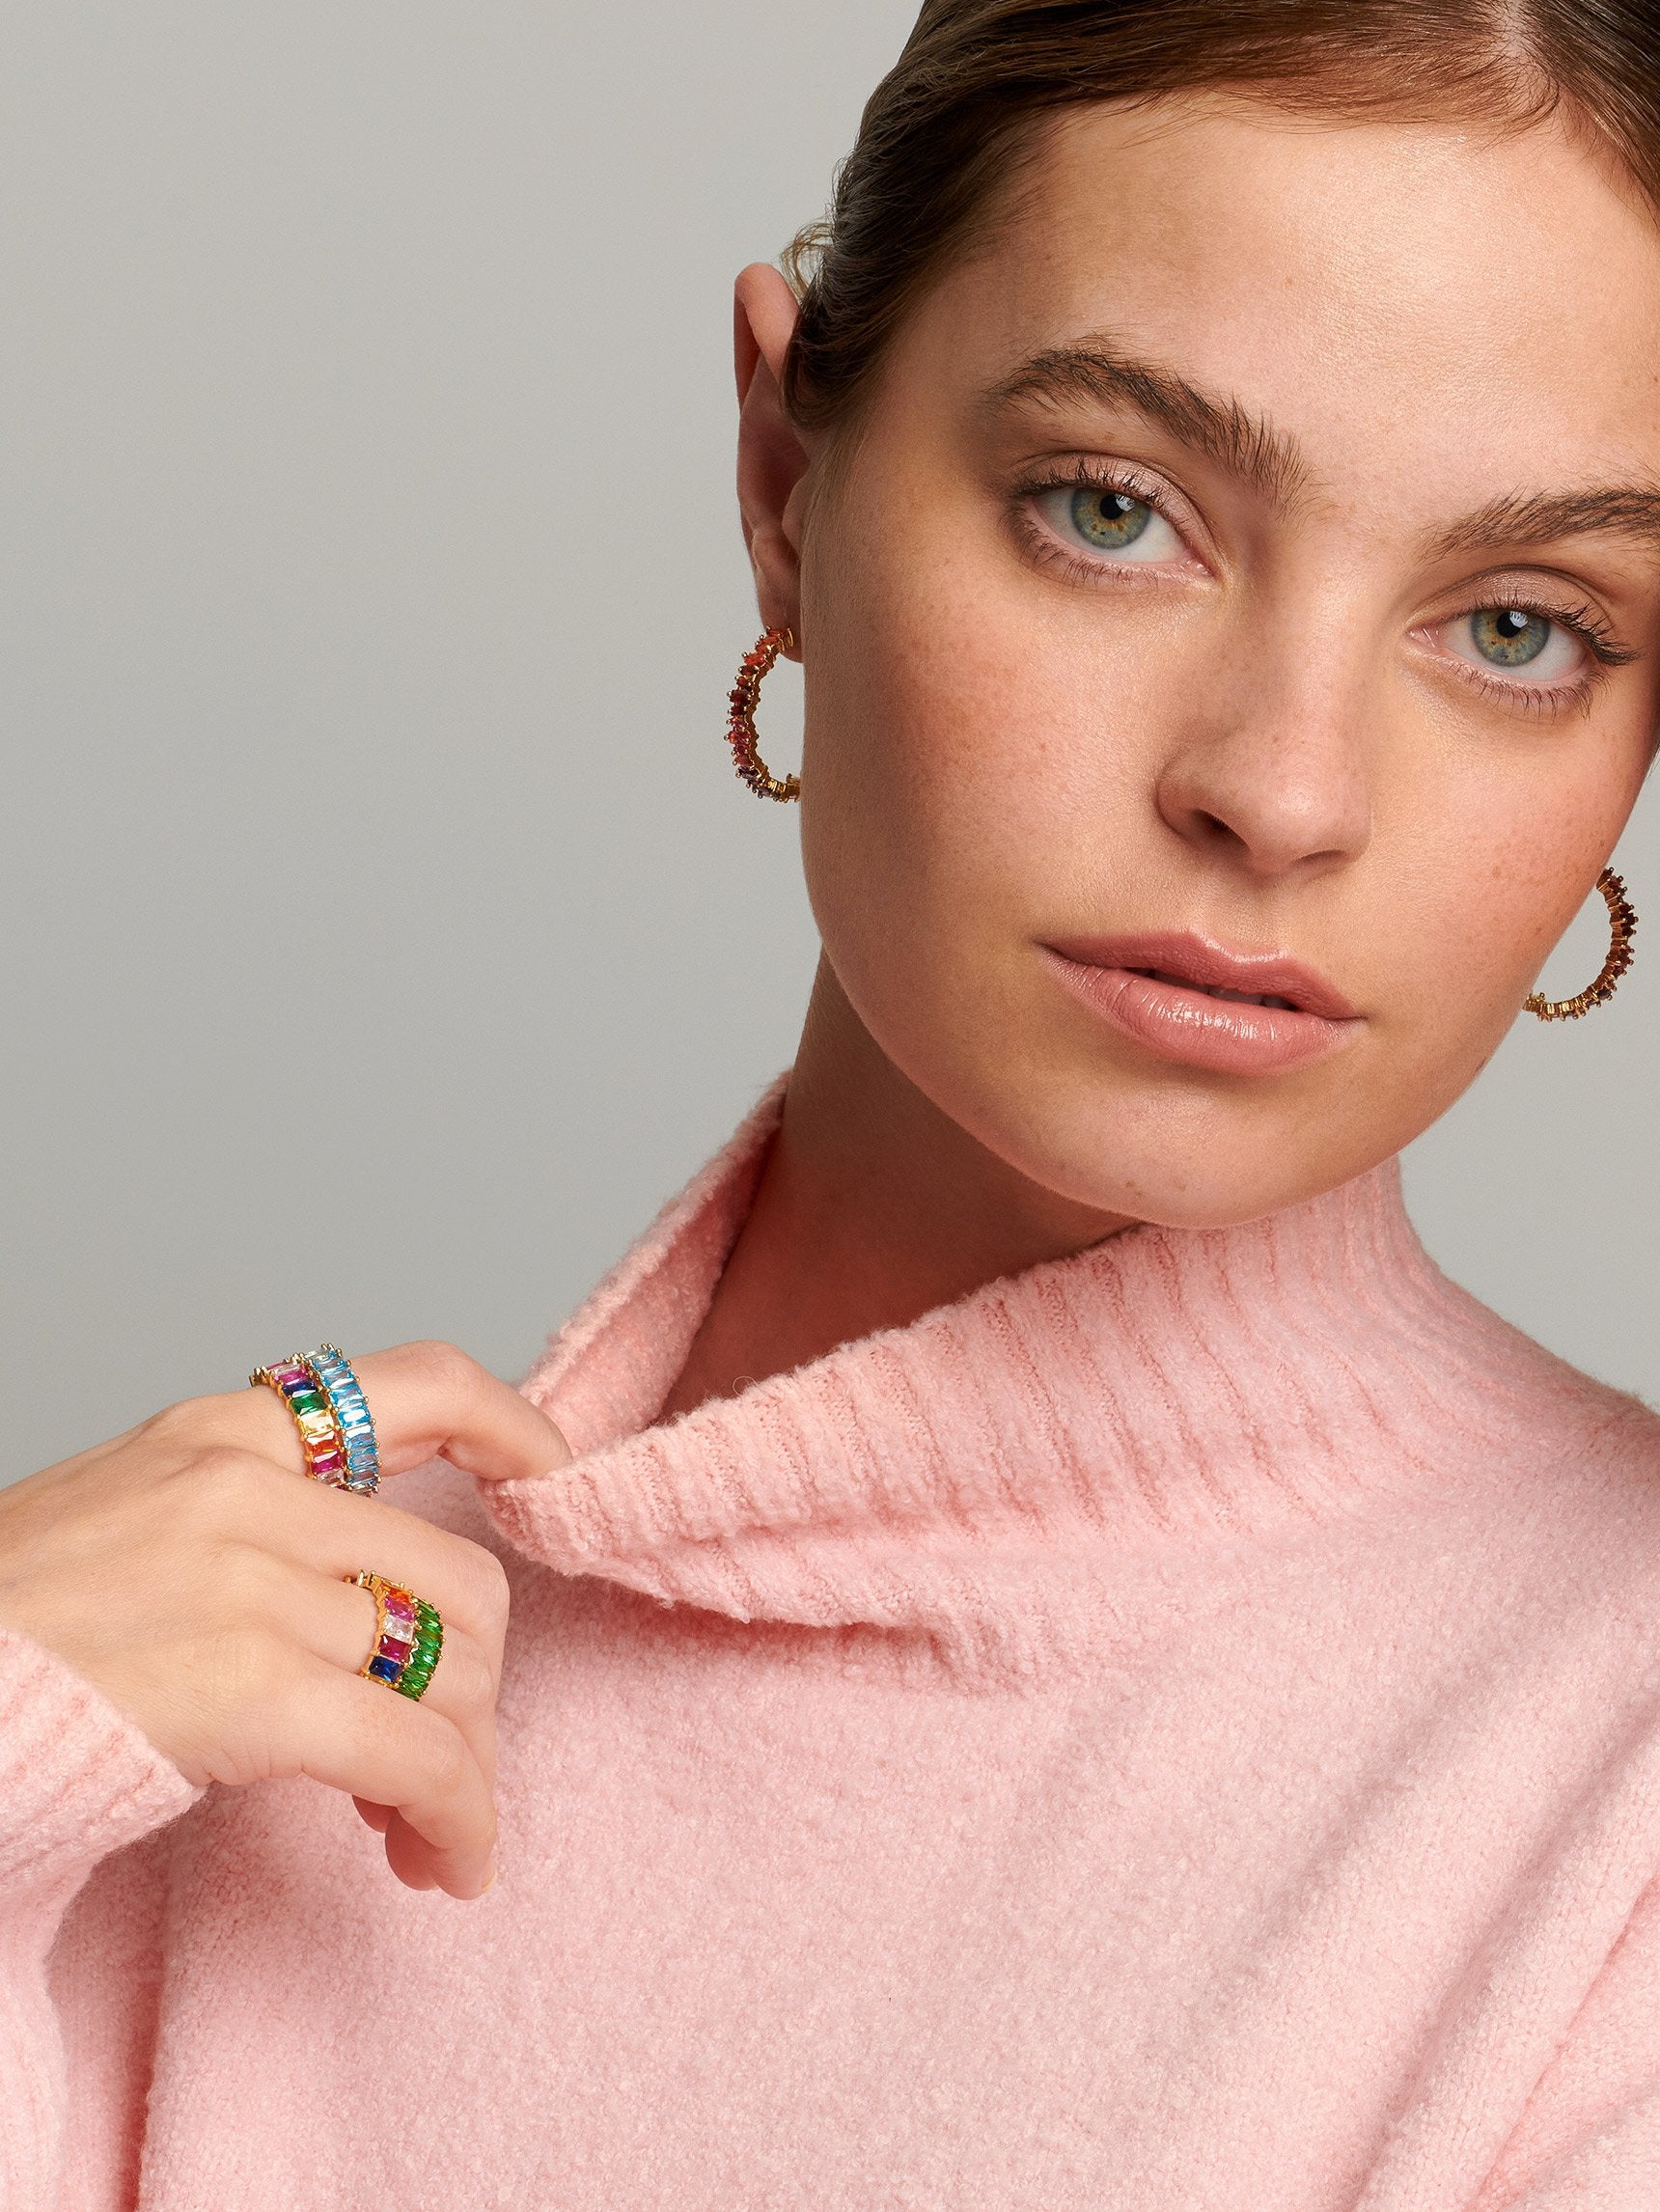 Teenage model wearing y2k inspired rings with colourful stones in turquoise, rainbow and green.